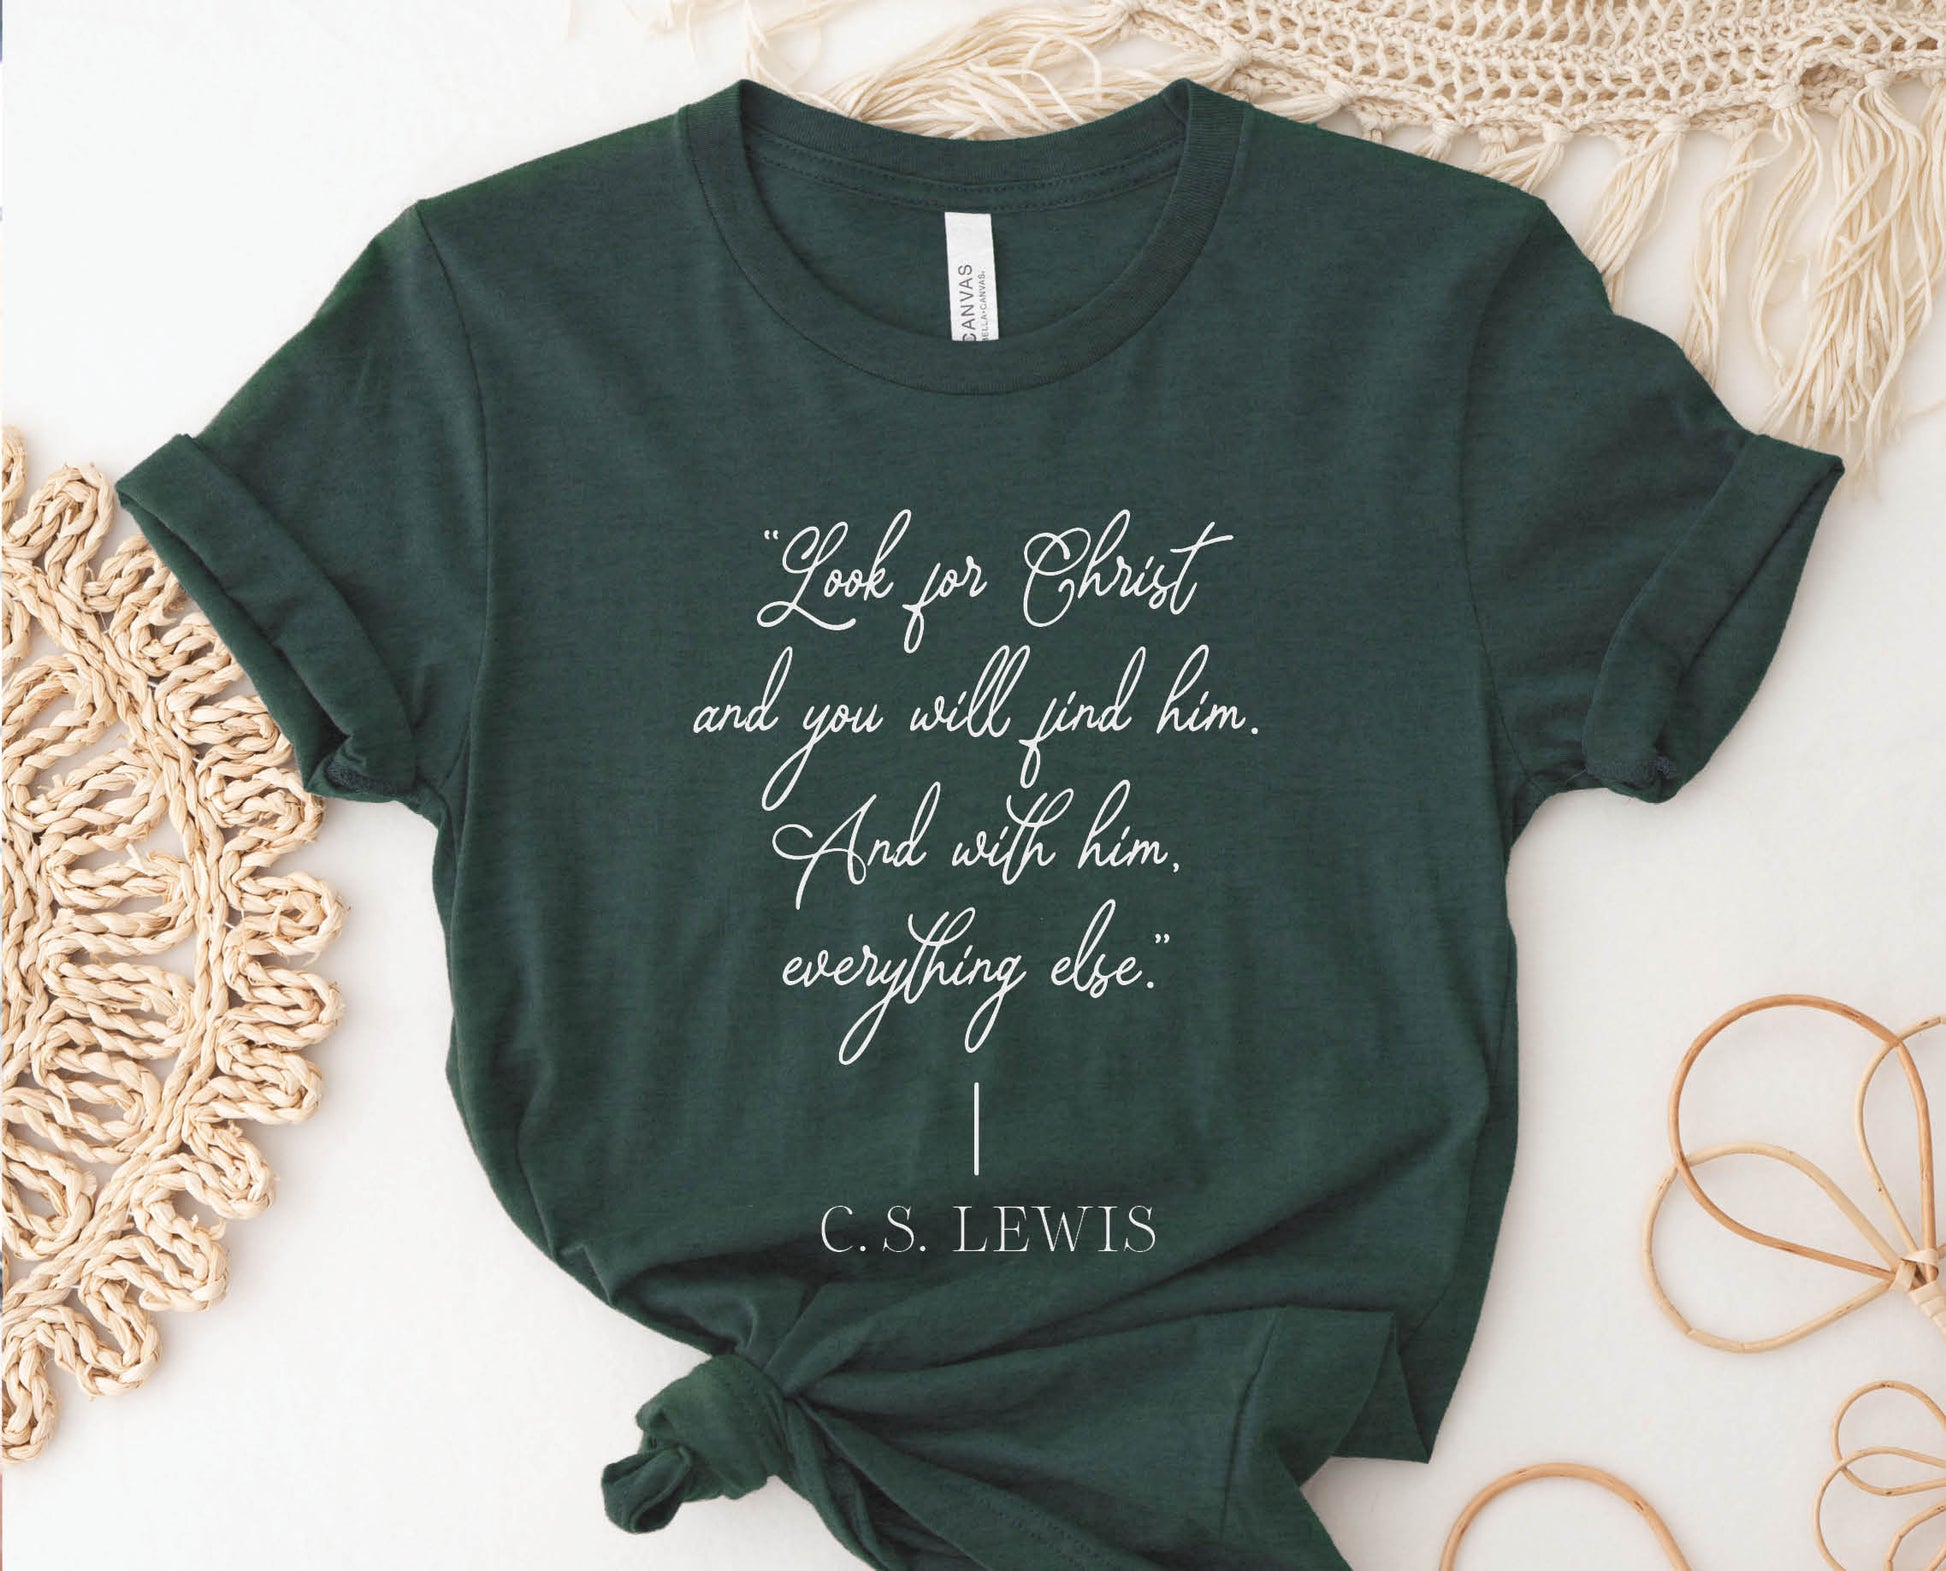 Soft quality heather forest green t-shirt with British writer Narnia author C.S. Lewis quote "Look for Christ and you will find him. And with him, everything else."  printed in white vintage script - Christian aesthetic unisex tee shirt design for women